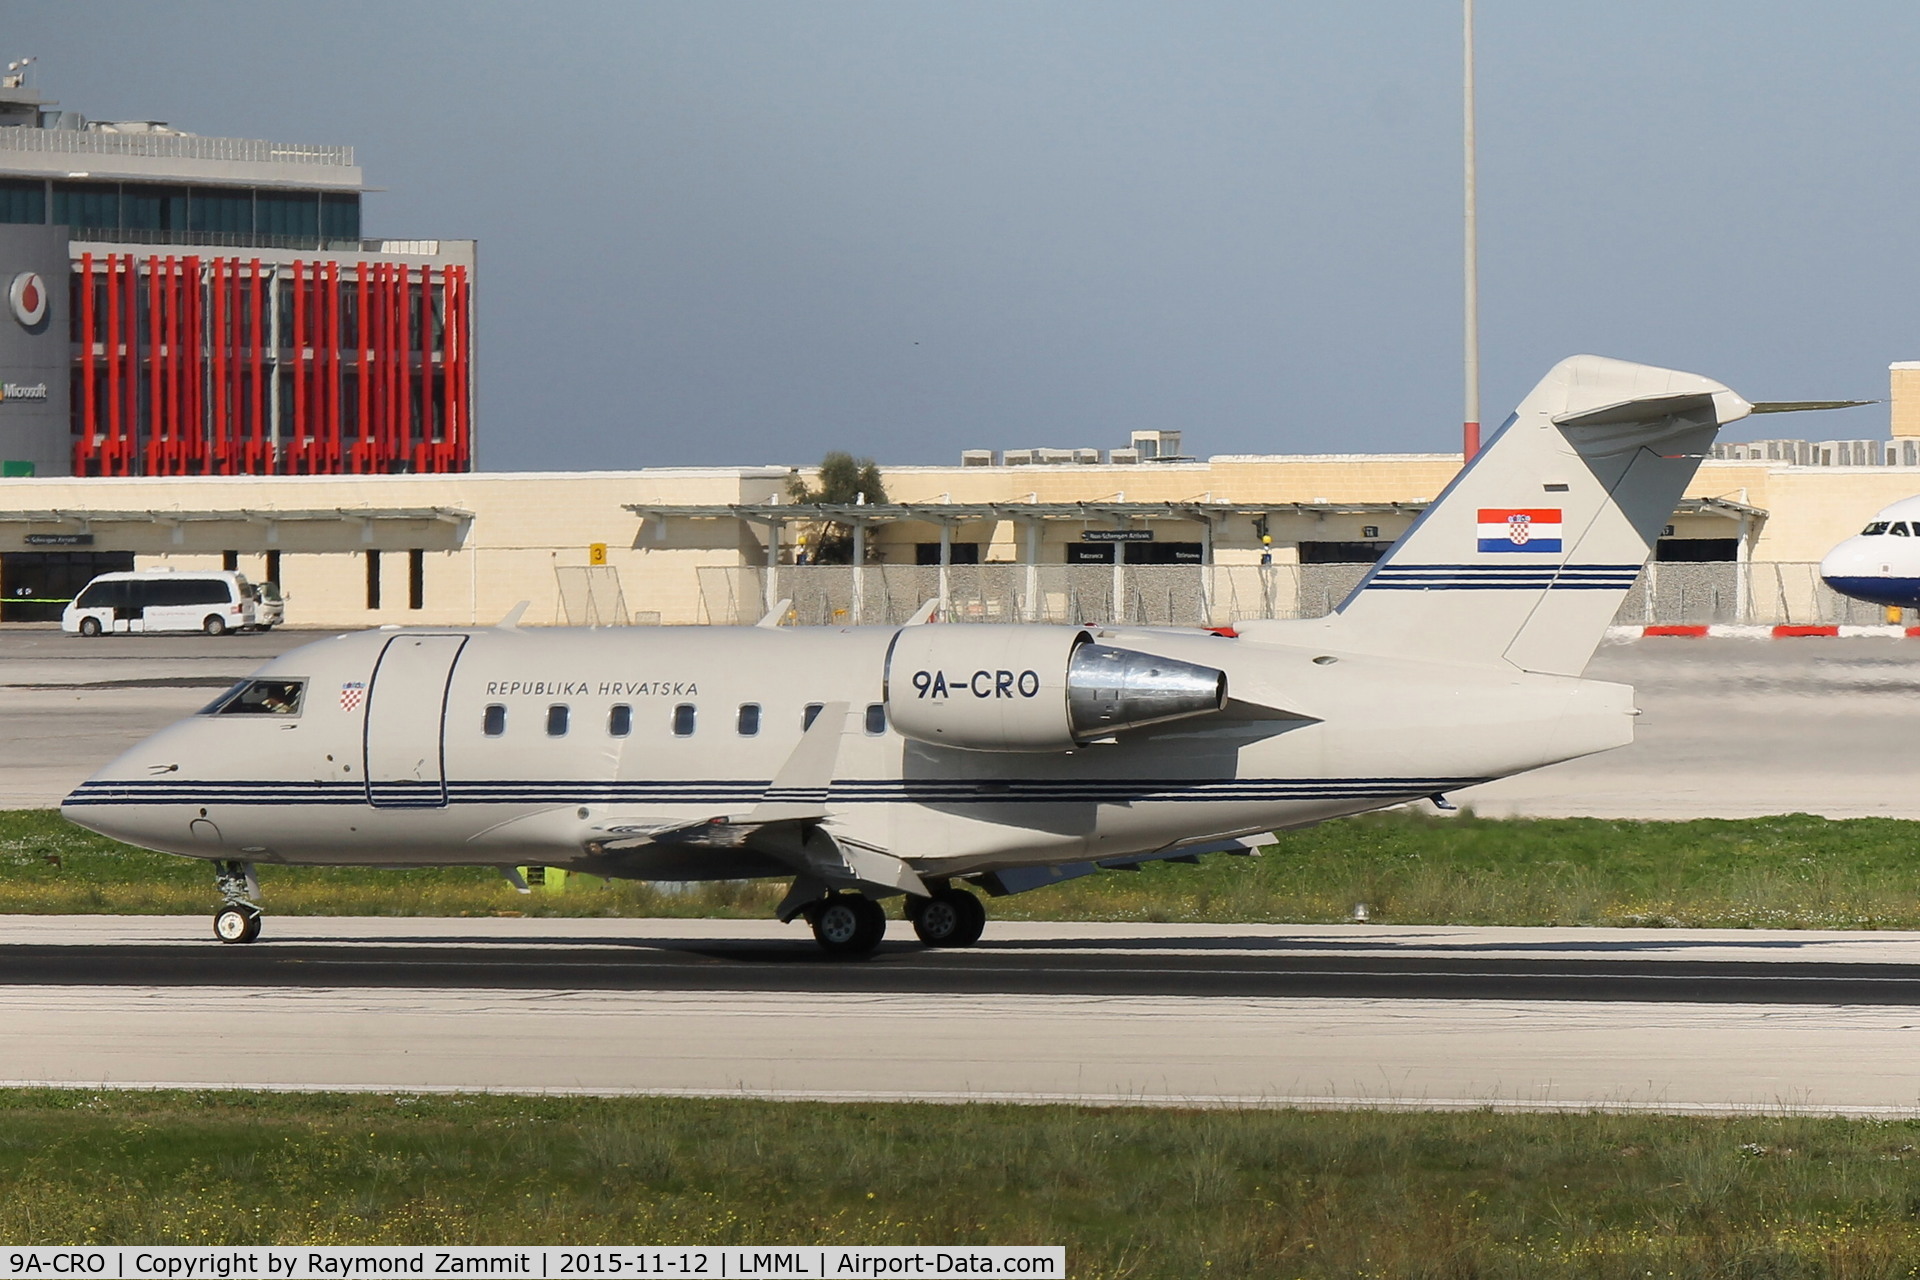 9A-CRO, 1996 Canadair Challenger 604 (CL-600-2B16) C/N 5322, Canadair CL-600 Challenger 604 9A-CRO Government of Croatia